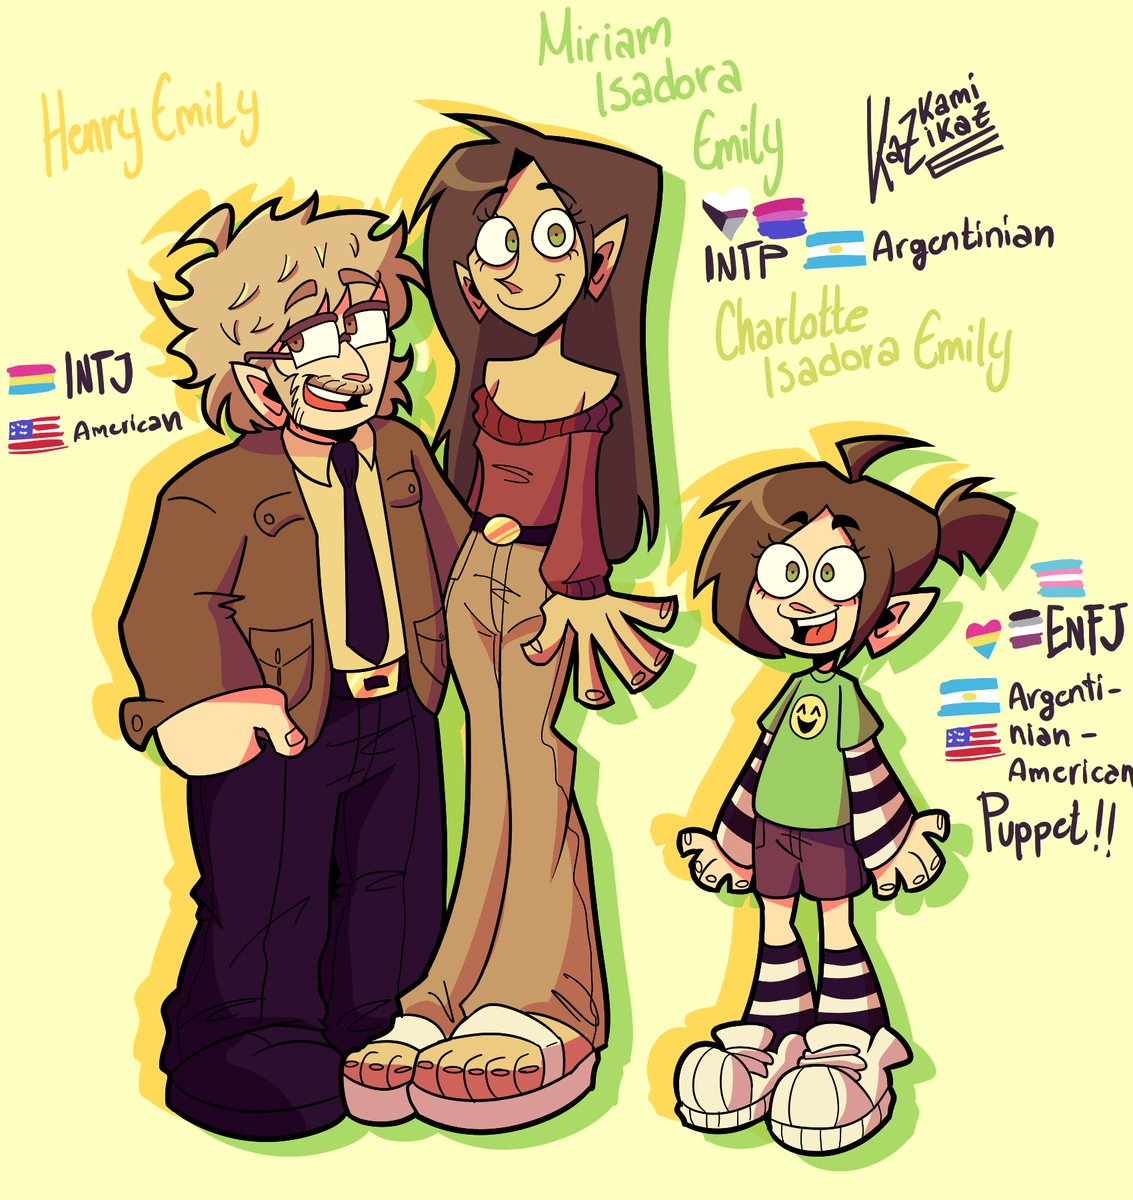 #fnafDIVERZION The Emily Family !! now i can show you Miriam, Mrs Emily, my dearest <3 Enjoy this designs !! i love em a lot :3 #fnaf #fnafau #charlieemily #henryemily #mrsemily